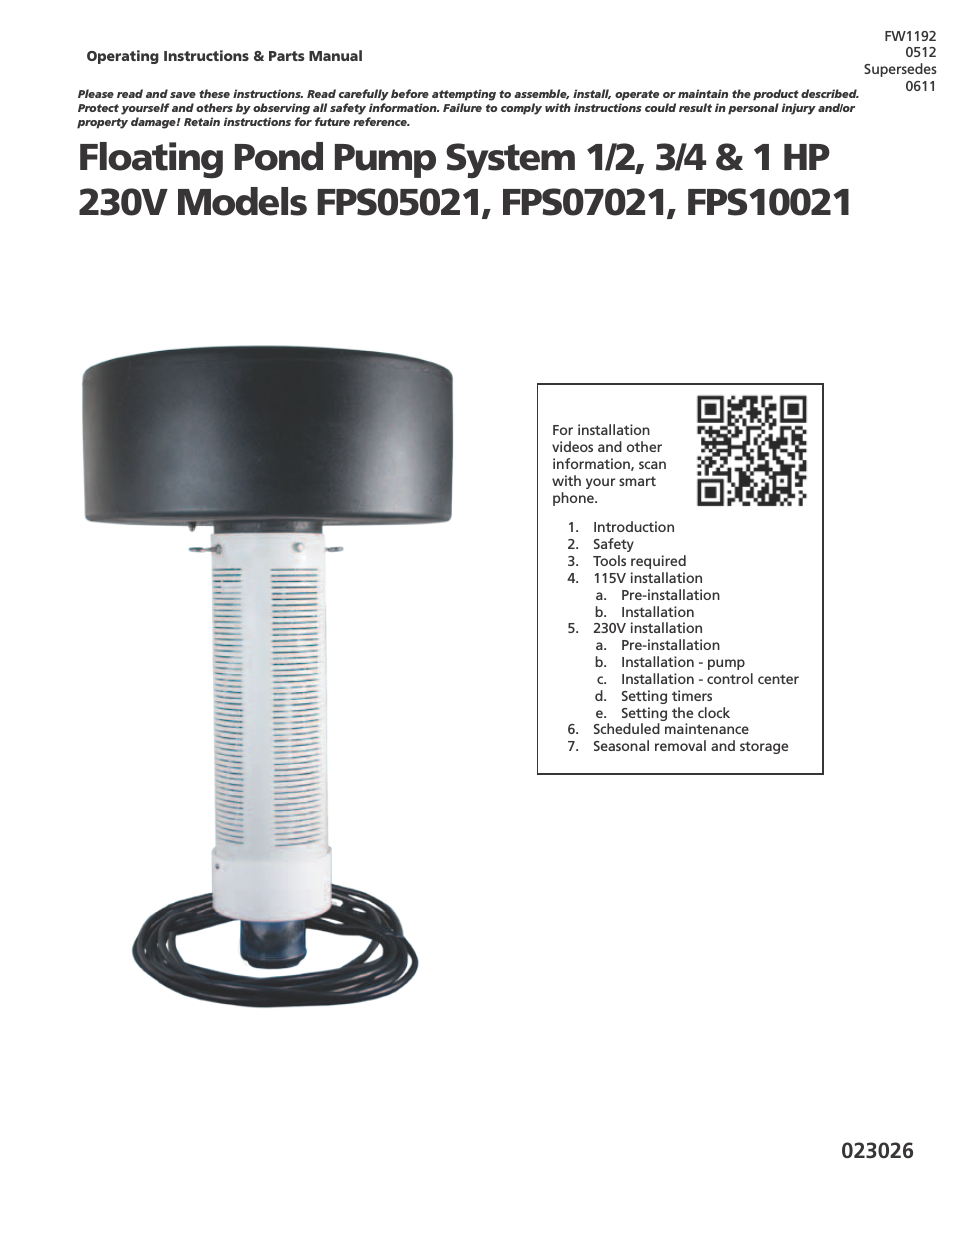 230V Pond and Fountain Systems FPS05021